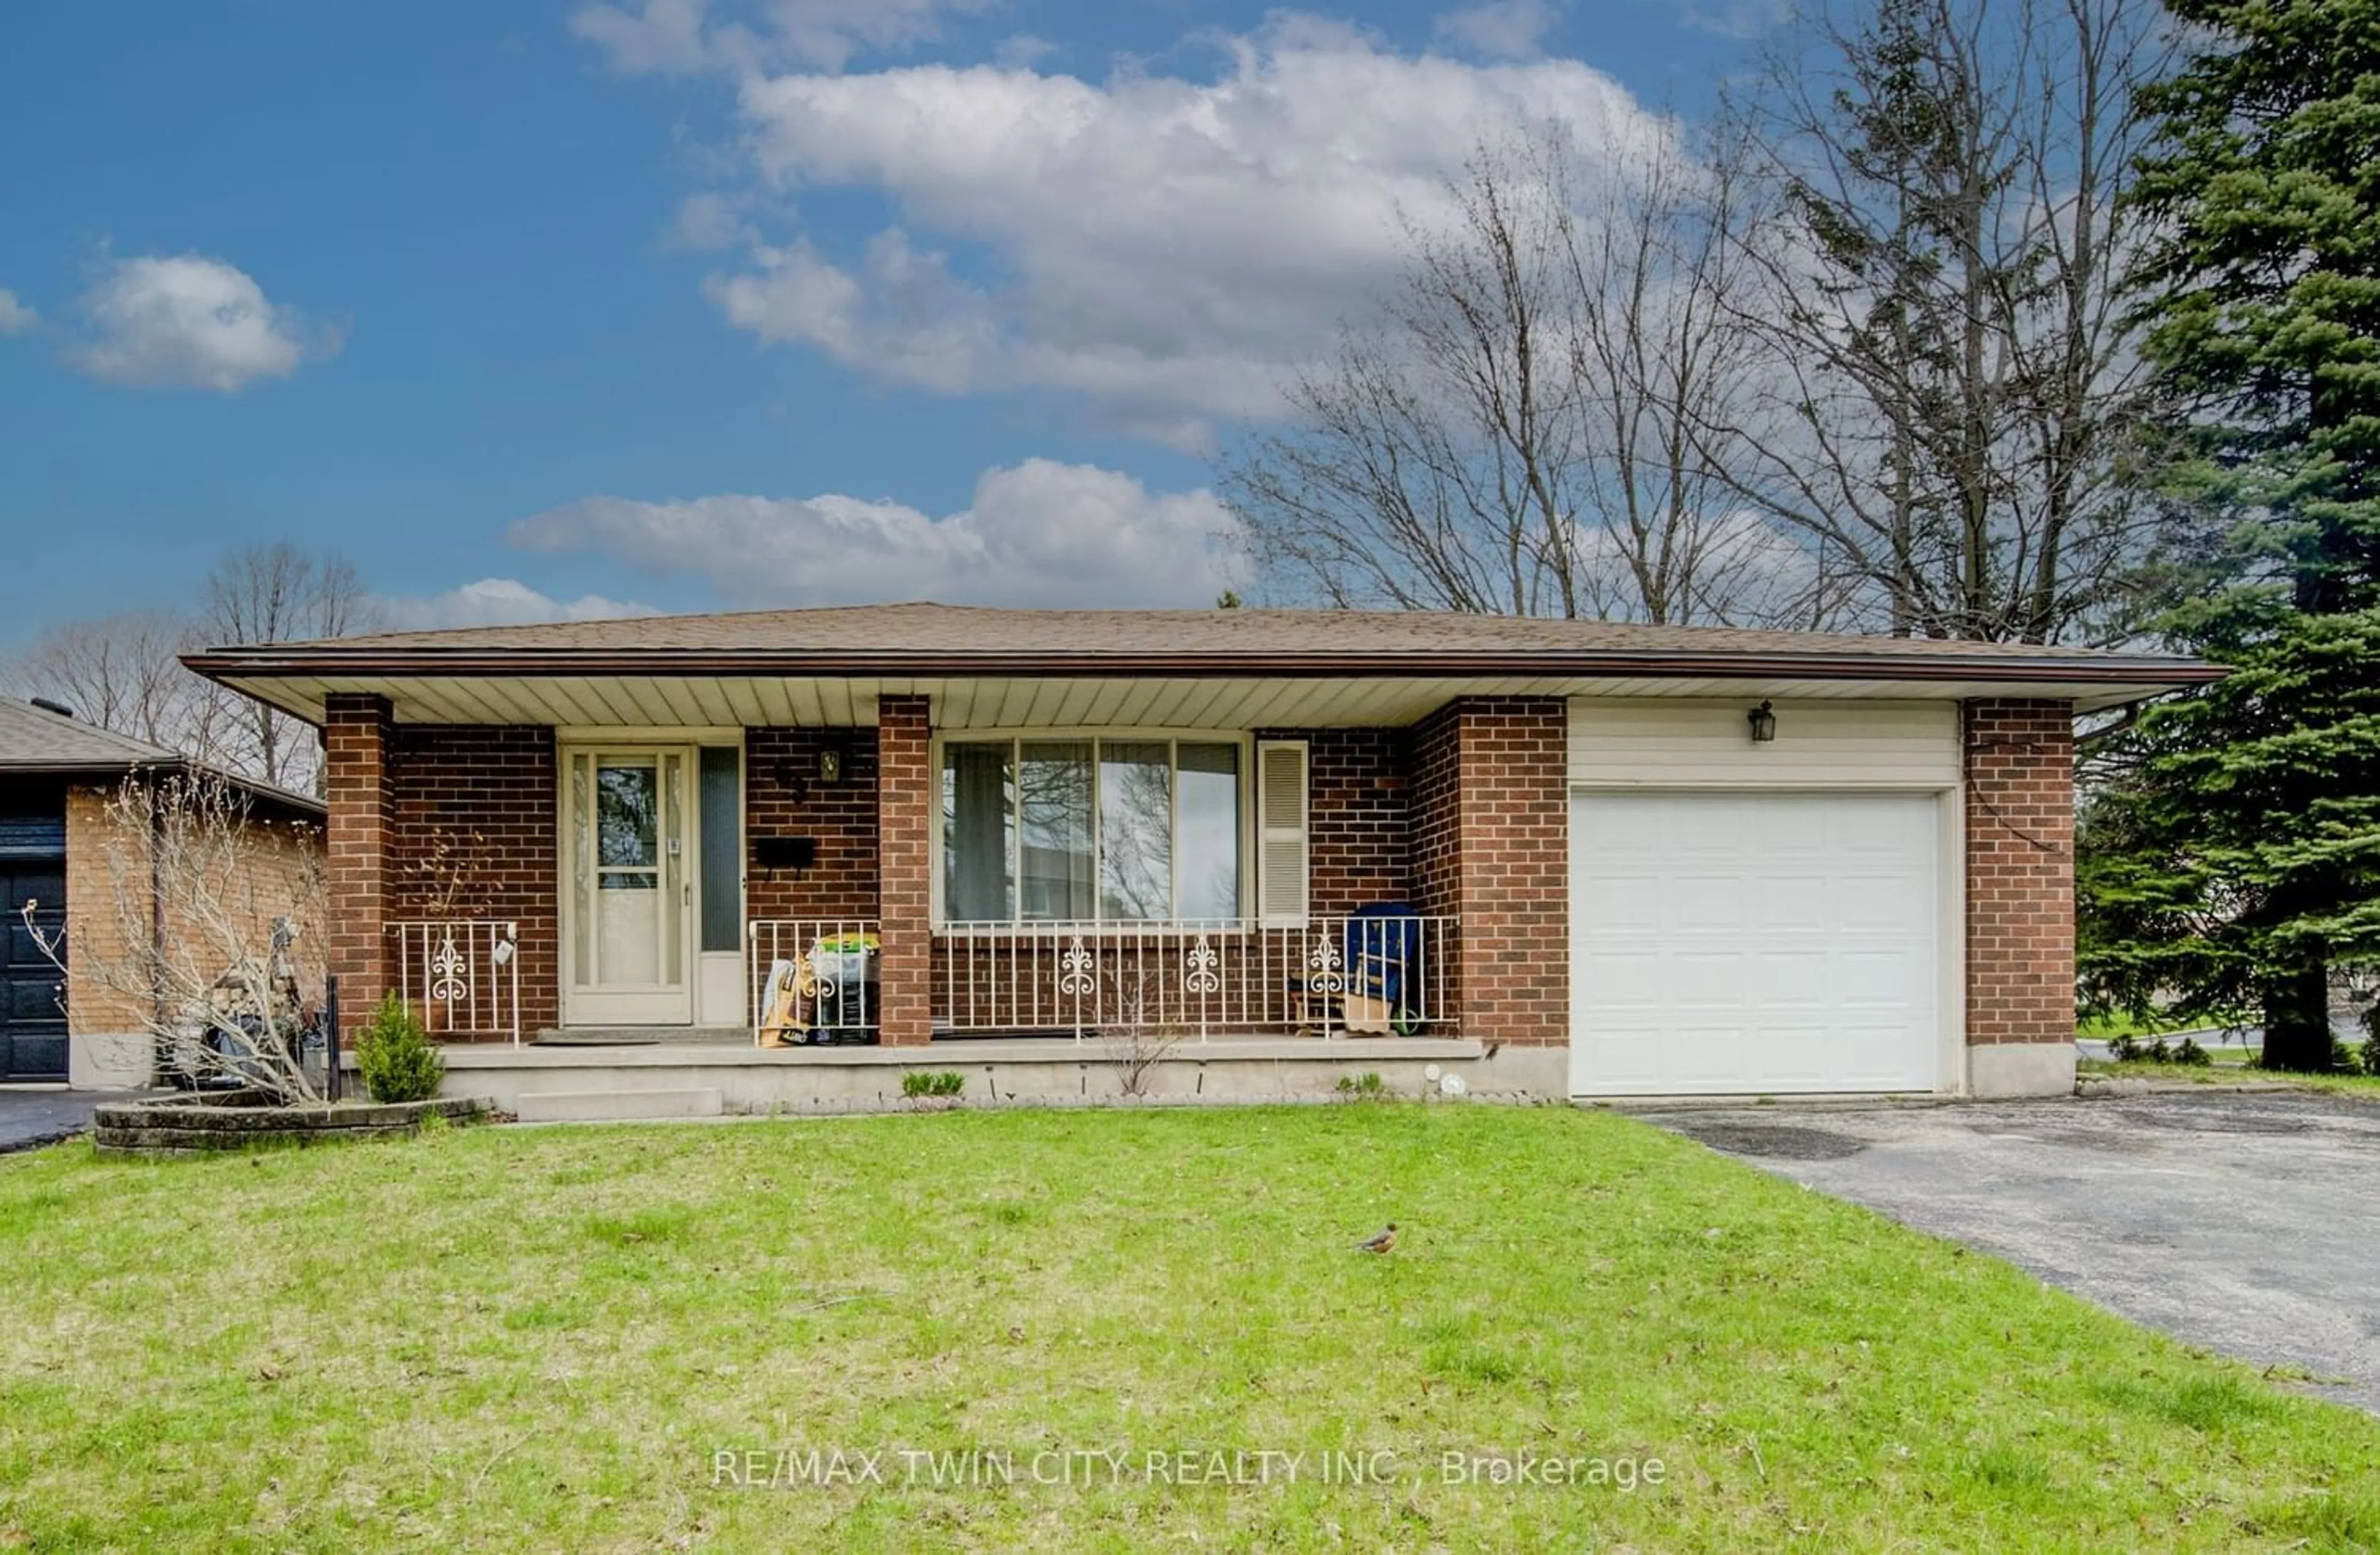 Home with brick exterior material for 63 Oldfield Dr, Kitchener Ontario N2A 3P3